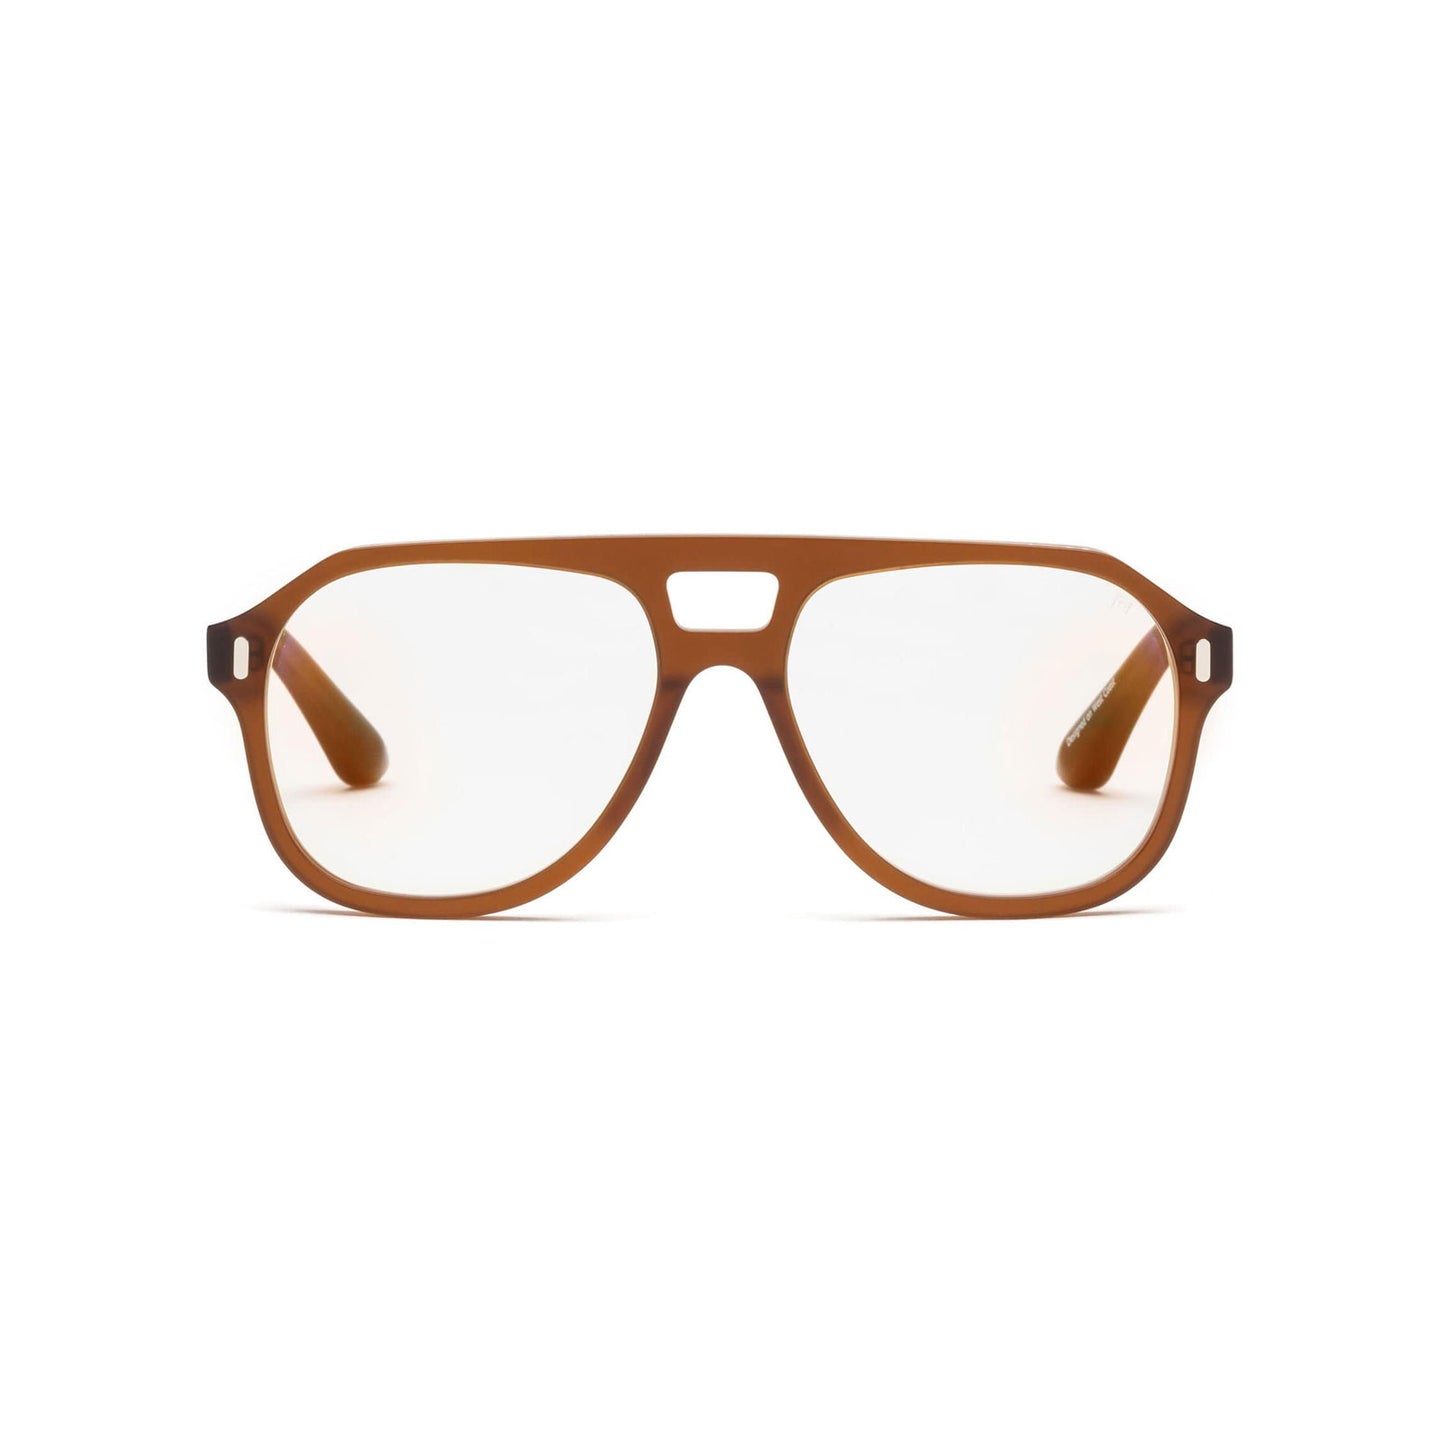 Caddis Reading Glasses, Root Cause Analysis, Matte Gopher